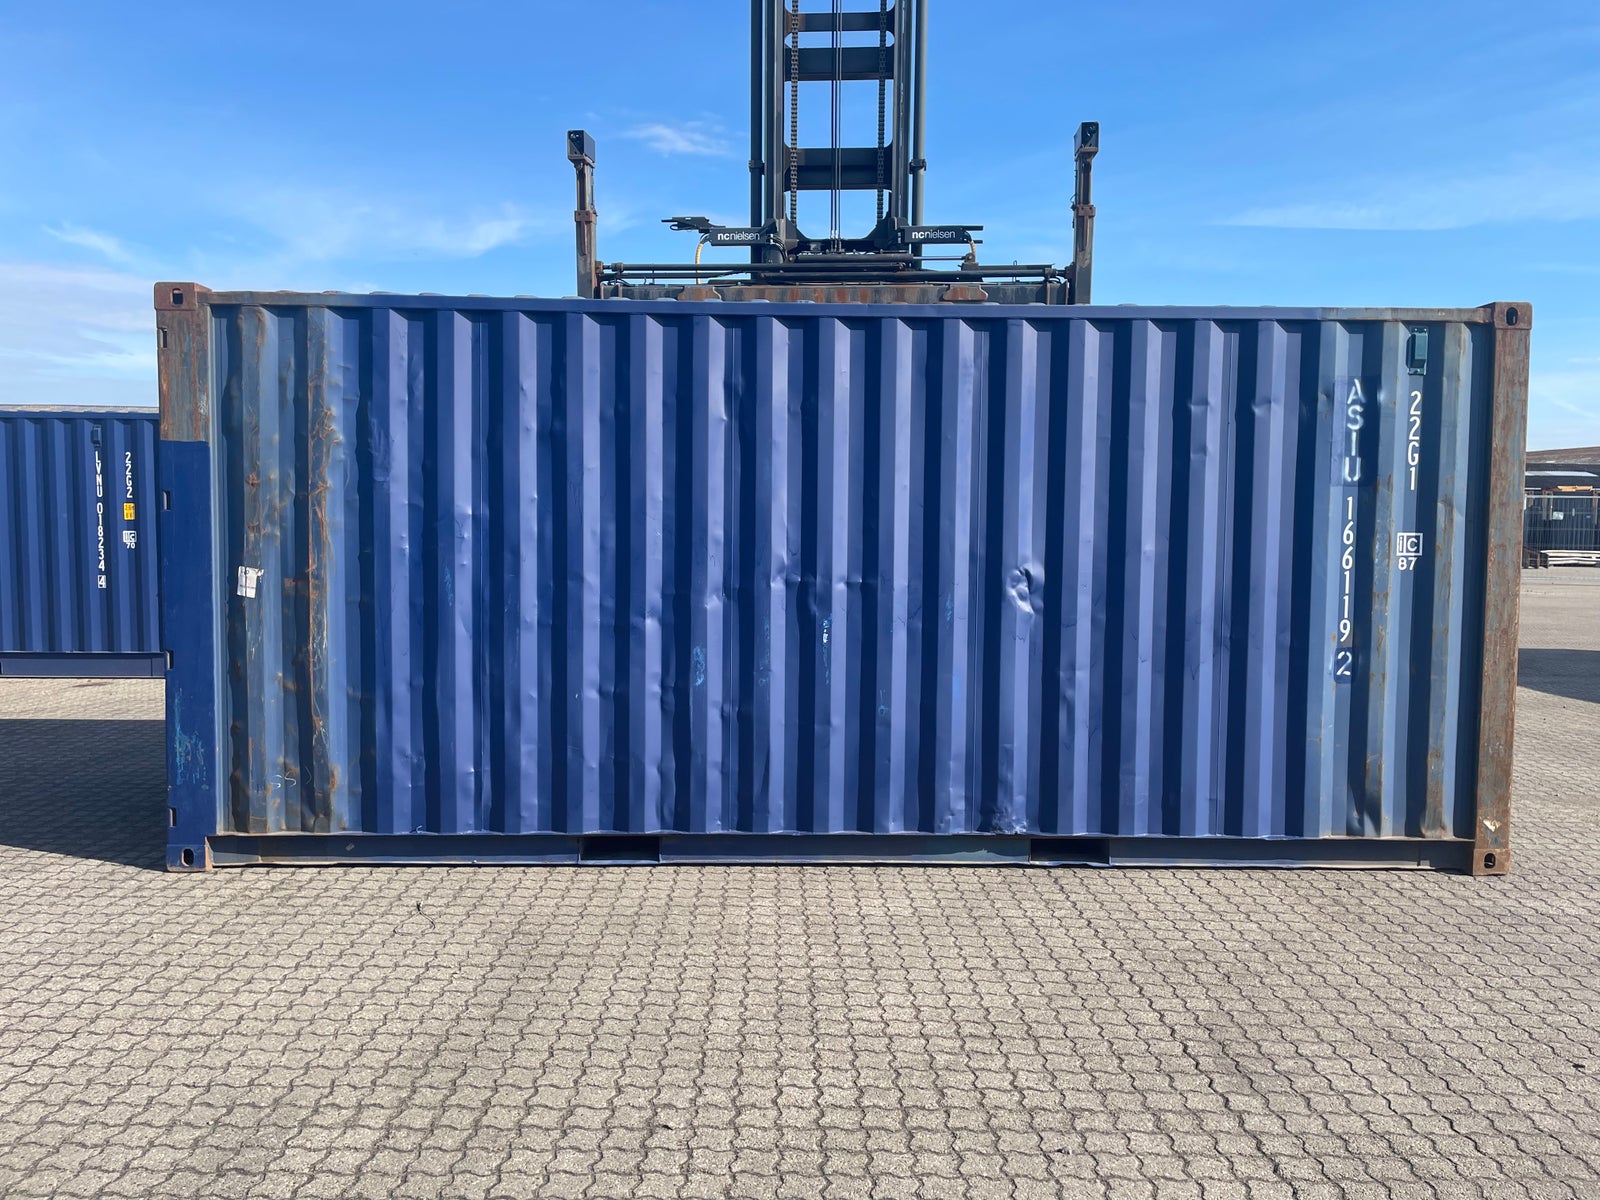 20 fods Container- ID: ASIU 166119-2